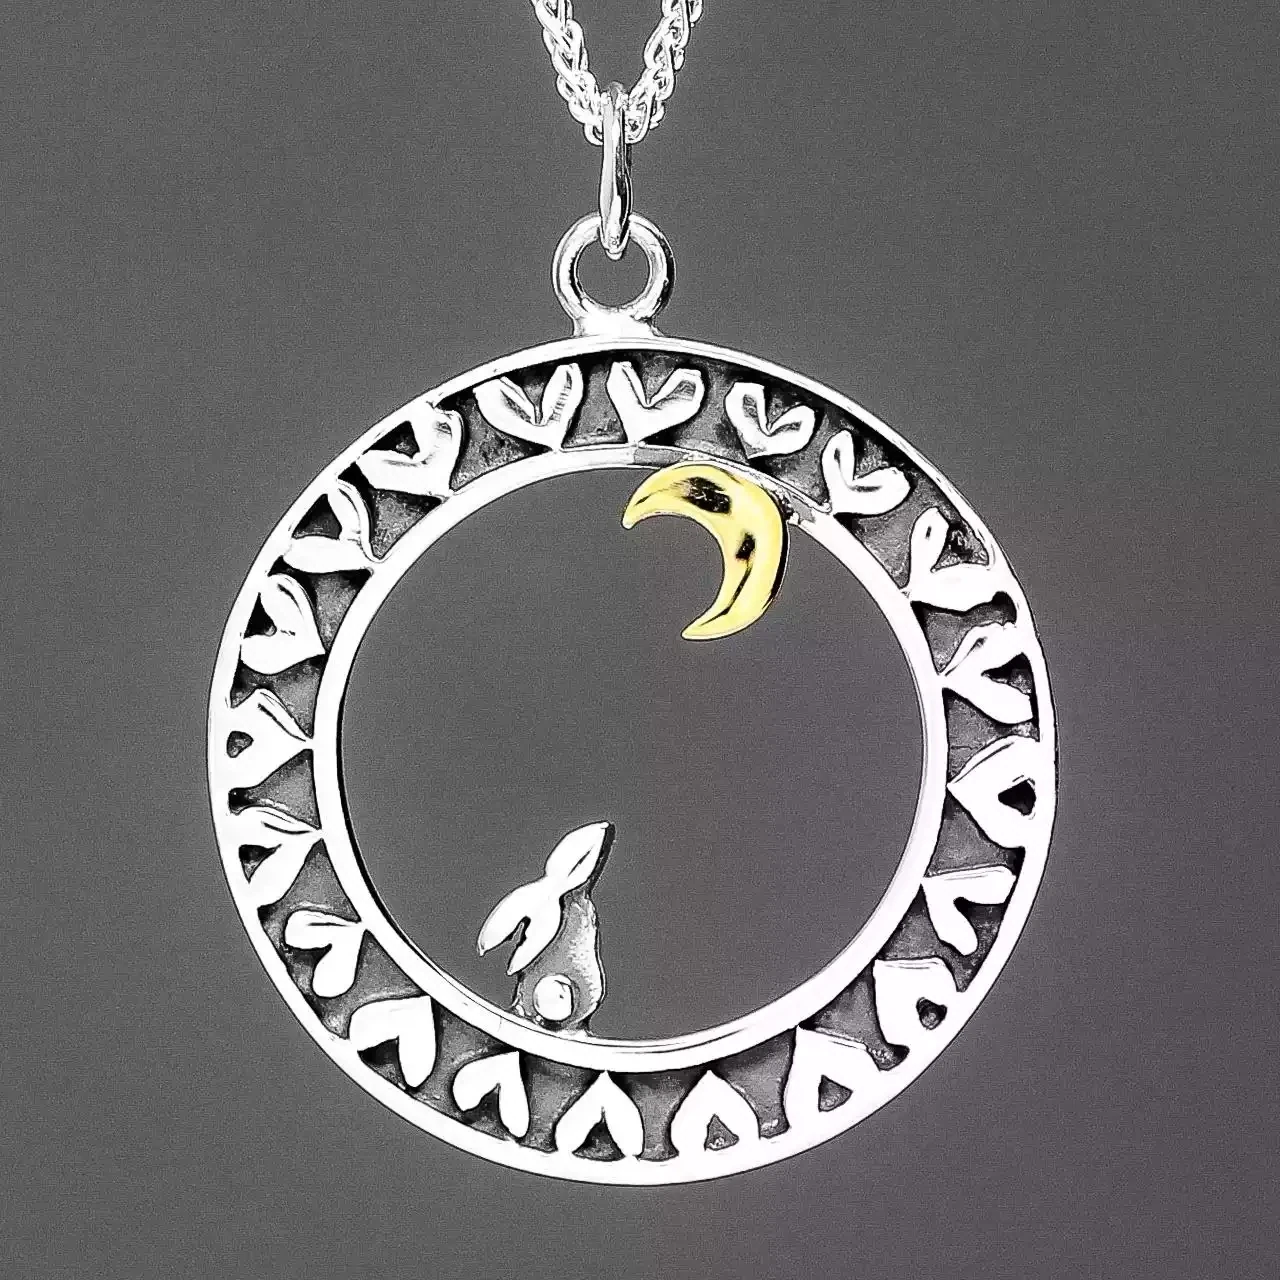 Moondance Hare Silver and Gold Necklace by Linda Macdonald